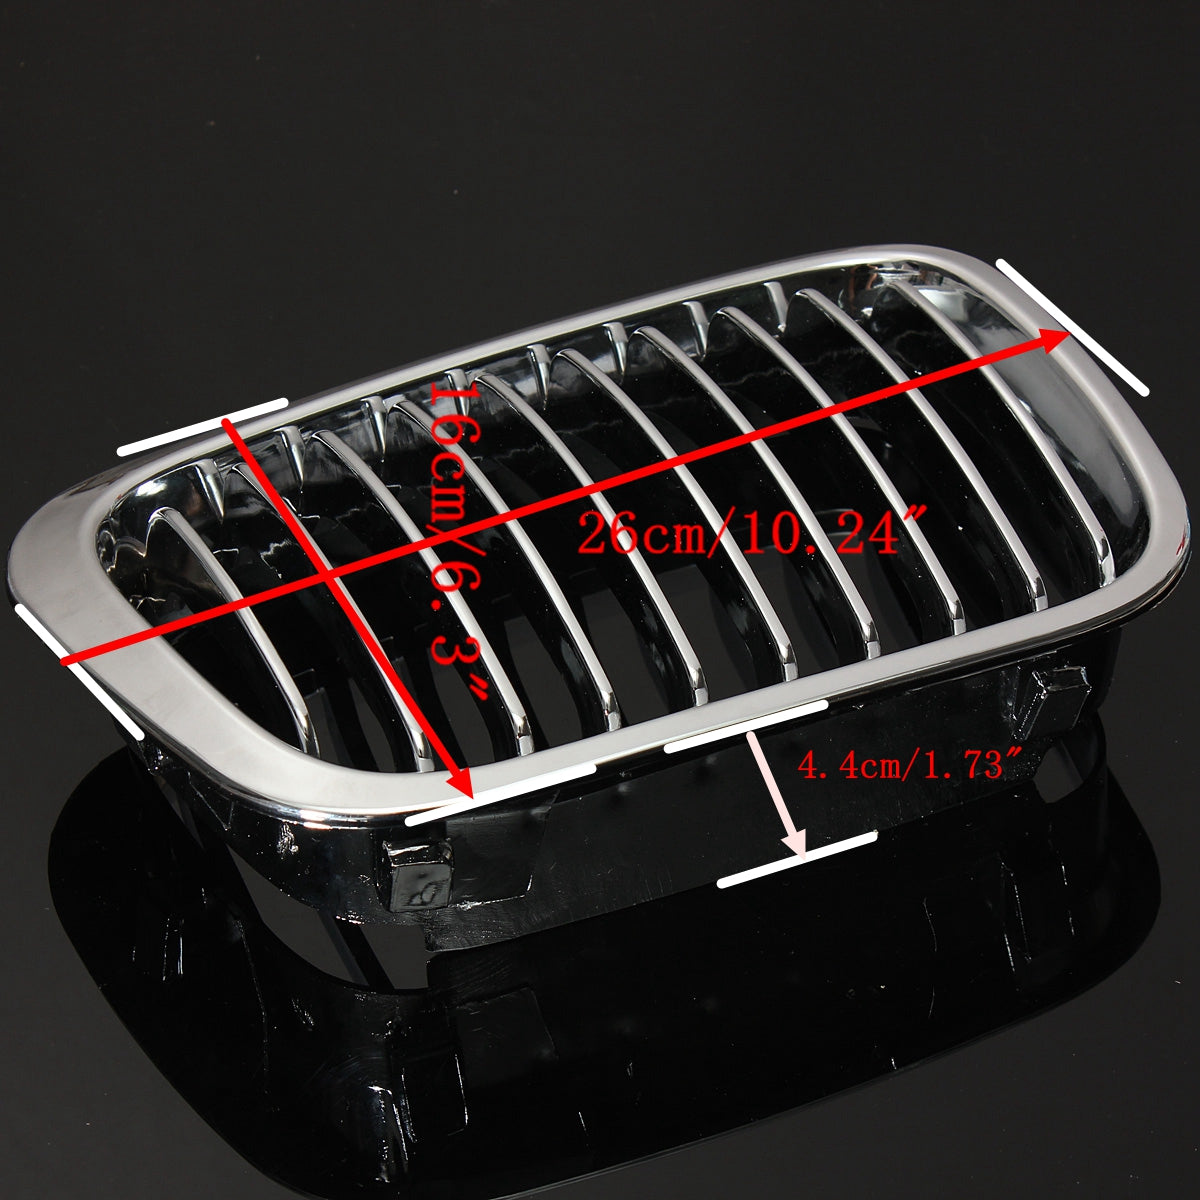 Front Kidney Chrome Glossy Grill Grille For BMW E46 3 Series 4 Door 4 DR 97-01 - Auto GoShop